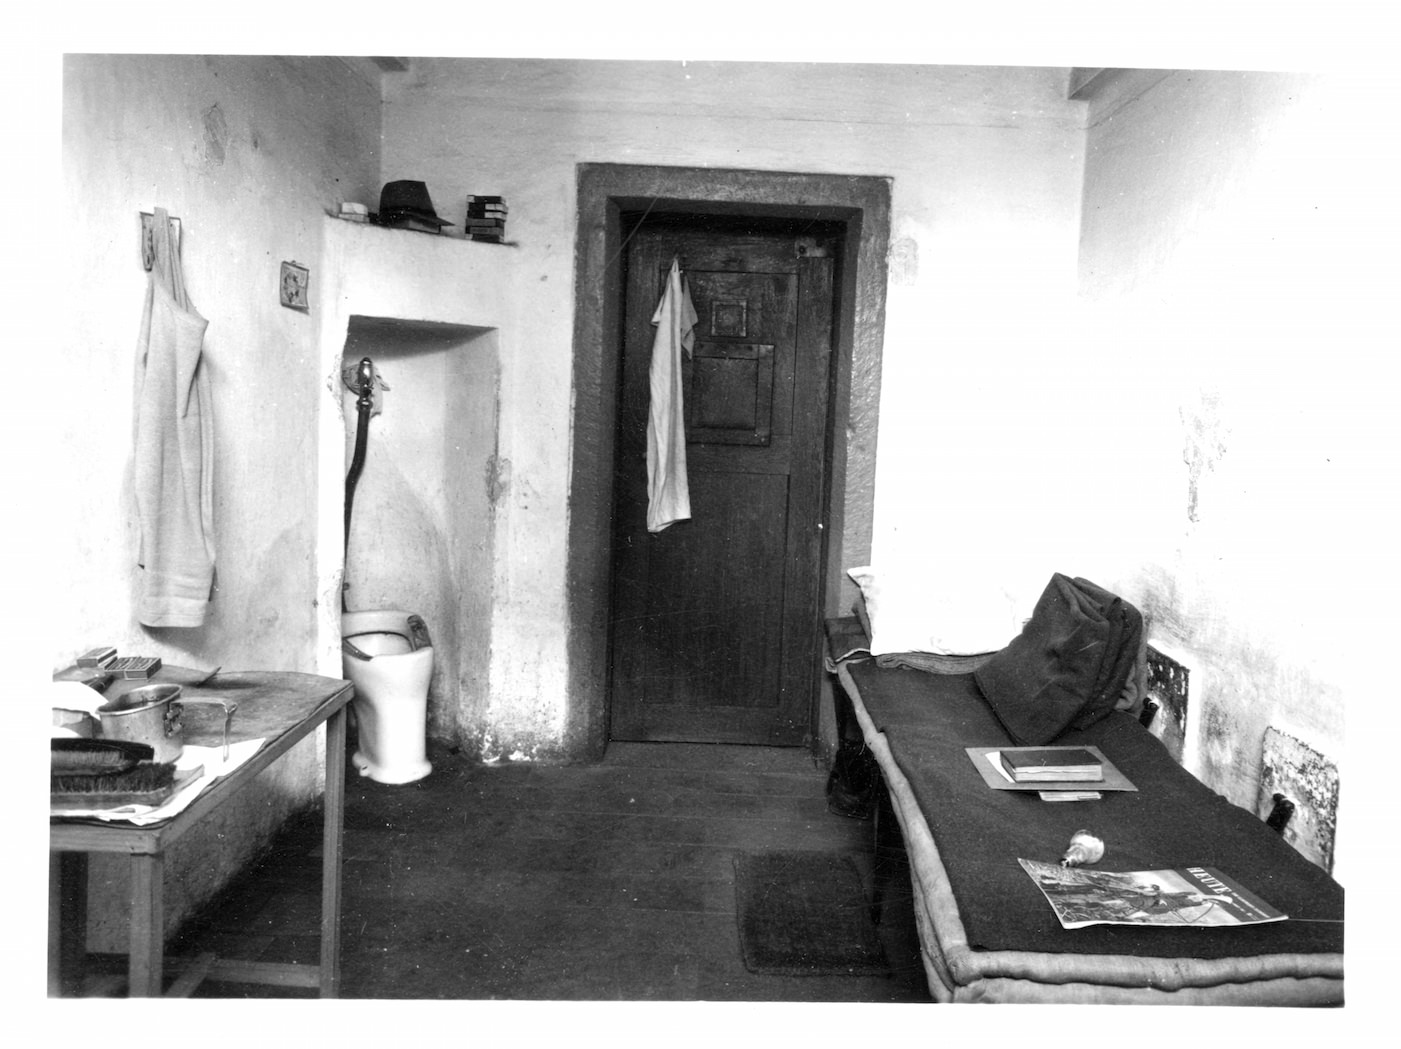 Prison Cell, Palace of Justice, Nuremberg Germany, IMT 1945-1946